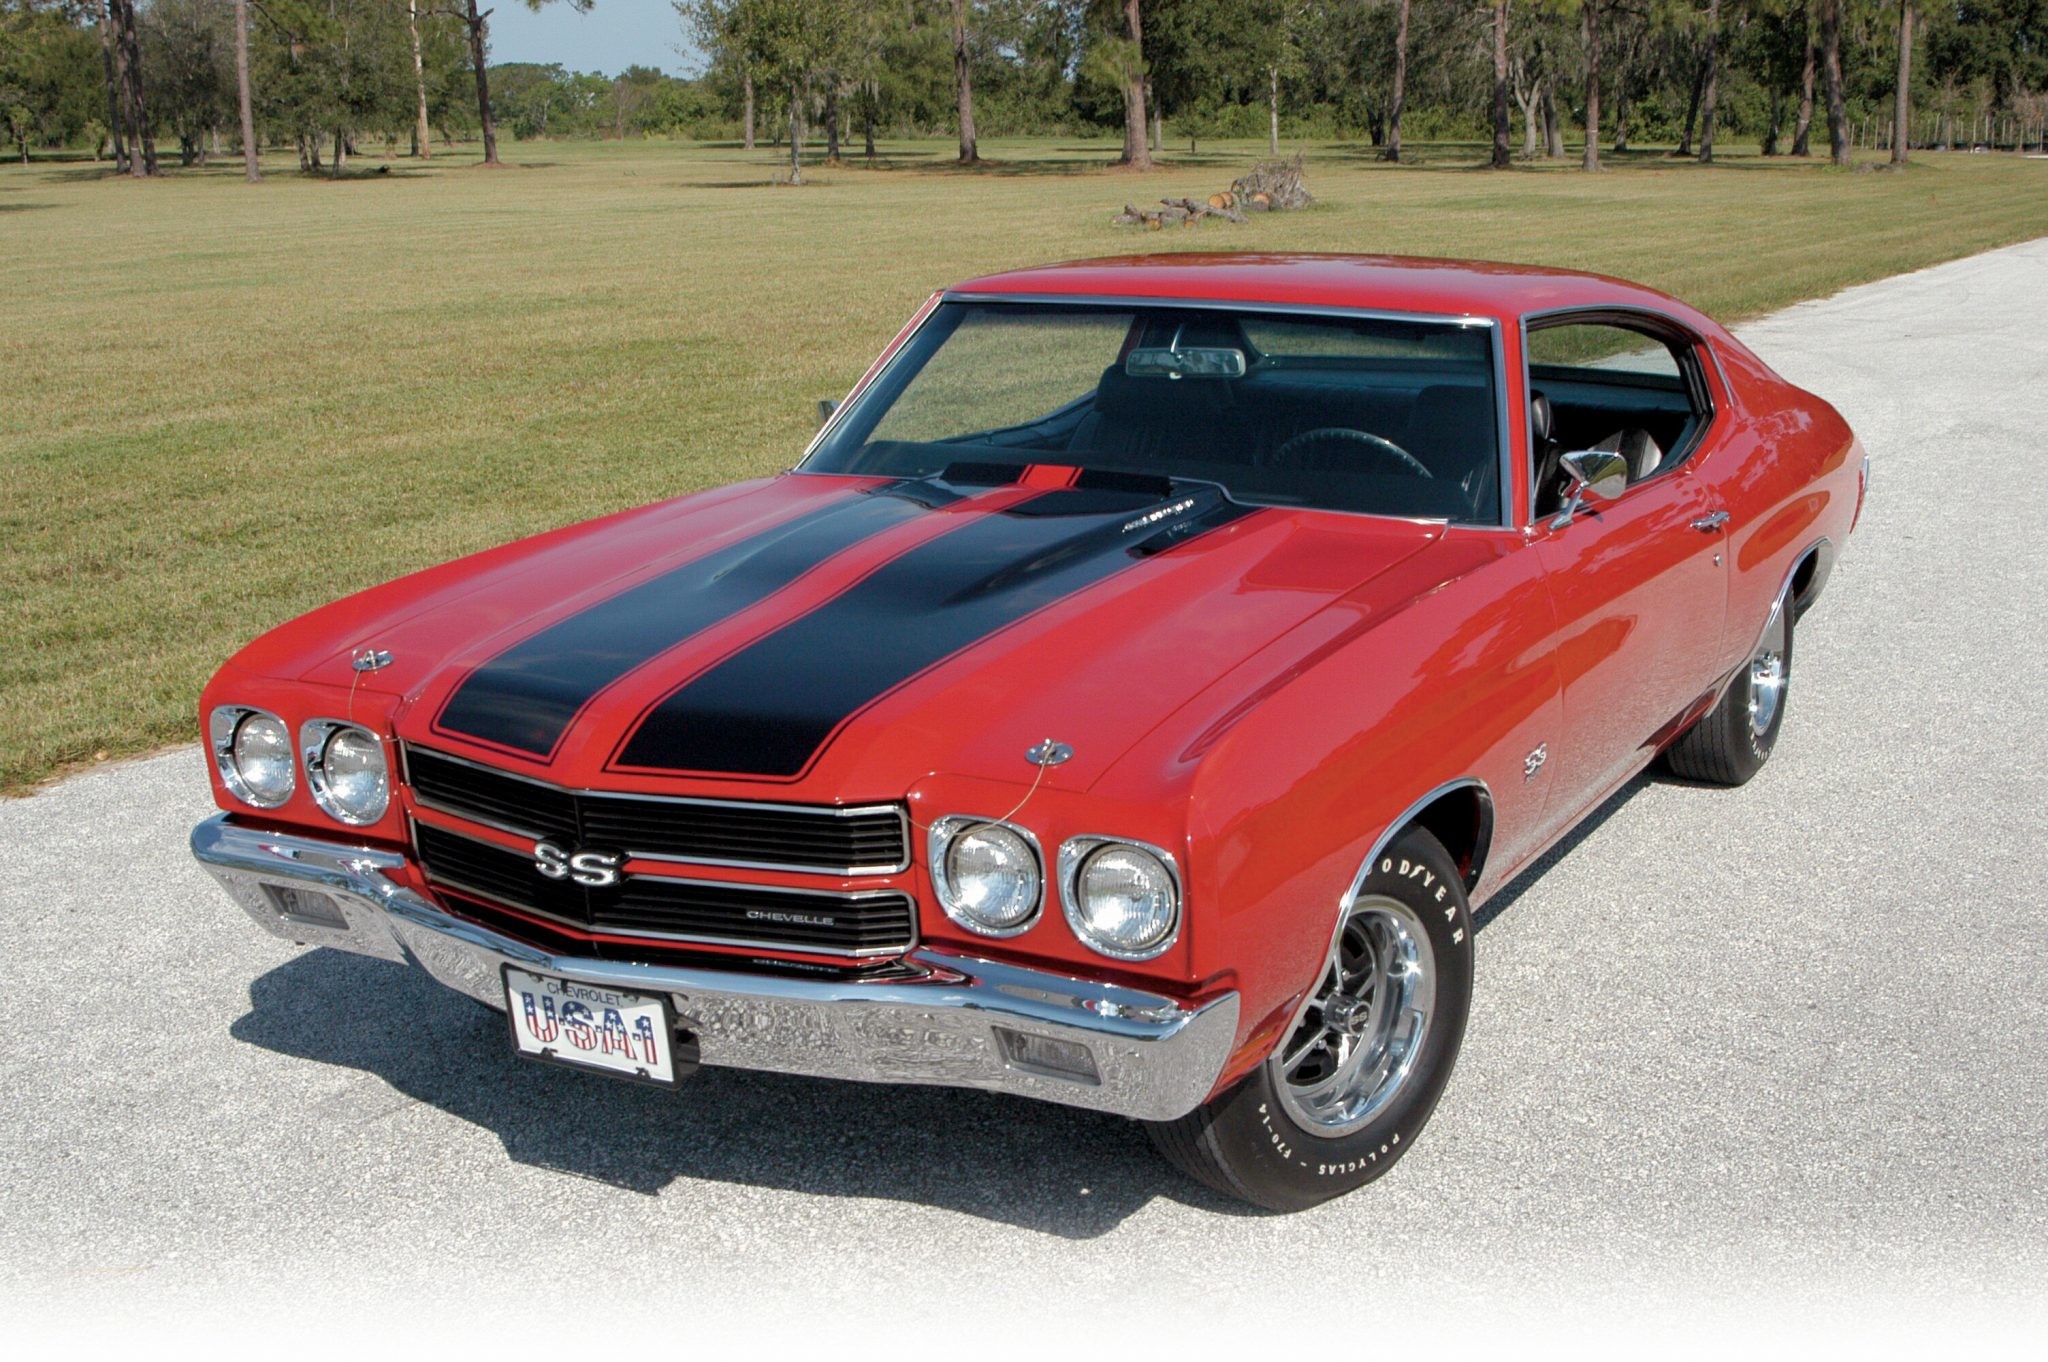 2048x1362 The Ultimate Muscle Car \u2013 The 1970 LS6 Chevelle Was America's King .